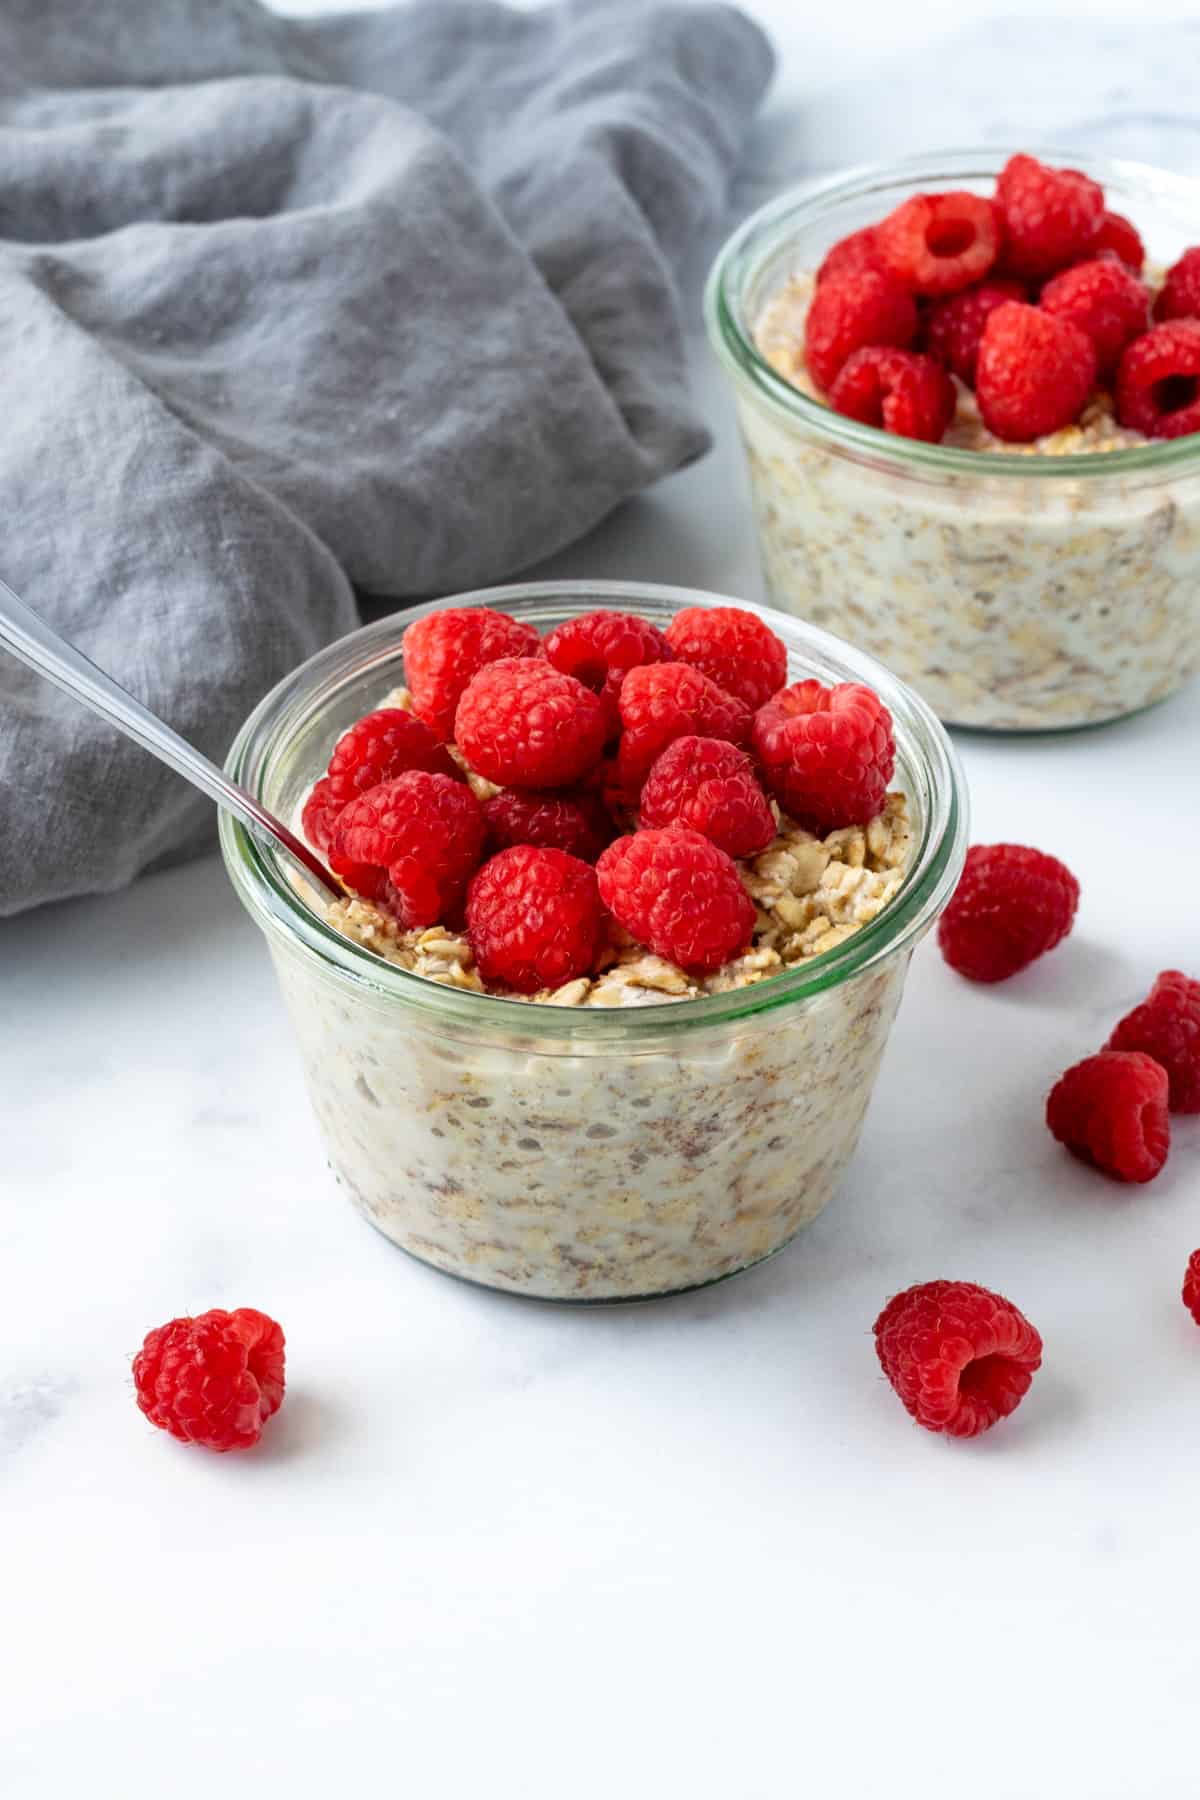 Overnight Oats with Raspberries on a marble countertop with raspberries spread on the table.